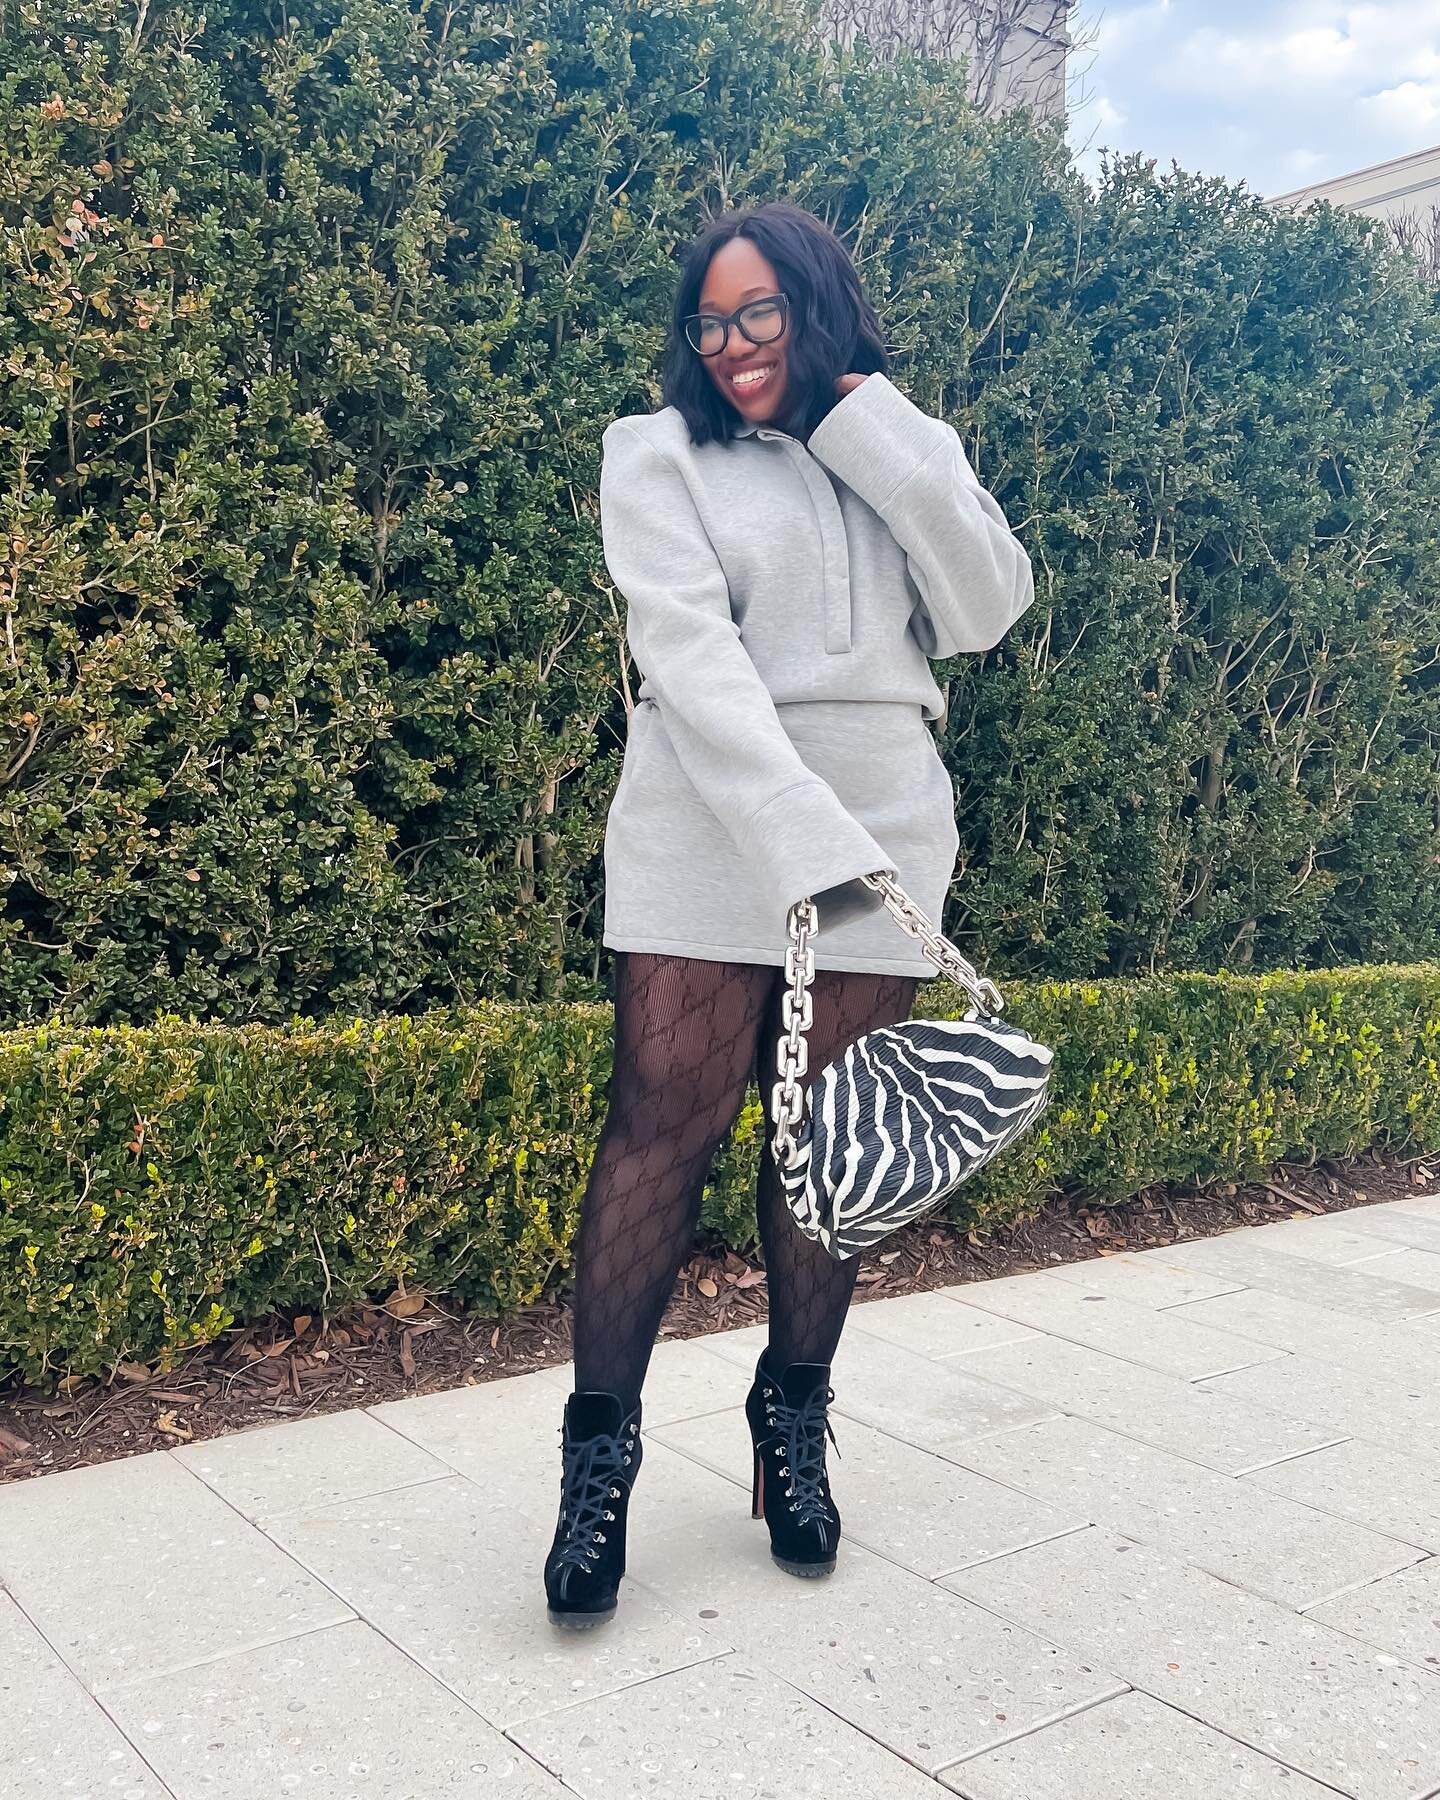 We couldn&rsquo;t let a nice day go to waste&hellip;.. #rhcharlotte #southparkcharlotte 

Outfit
Dress : @the_attico 
Tights: @gucci 
Boots: @maisonalaia 
Bag: @newbottega